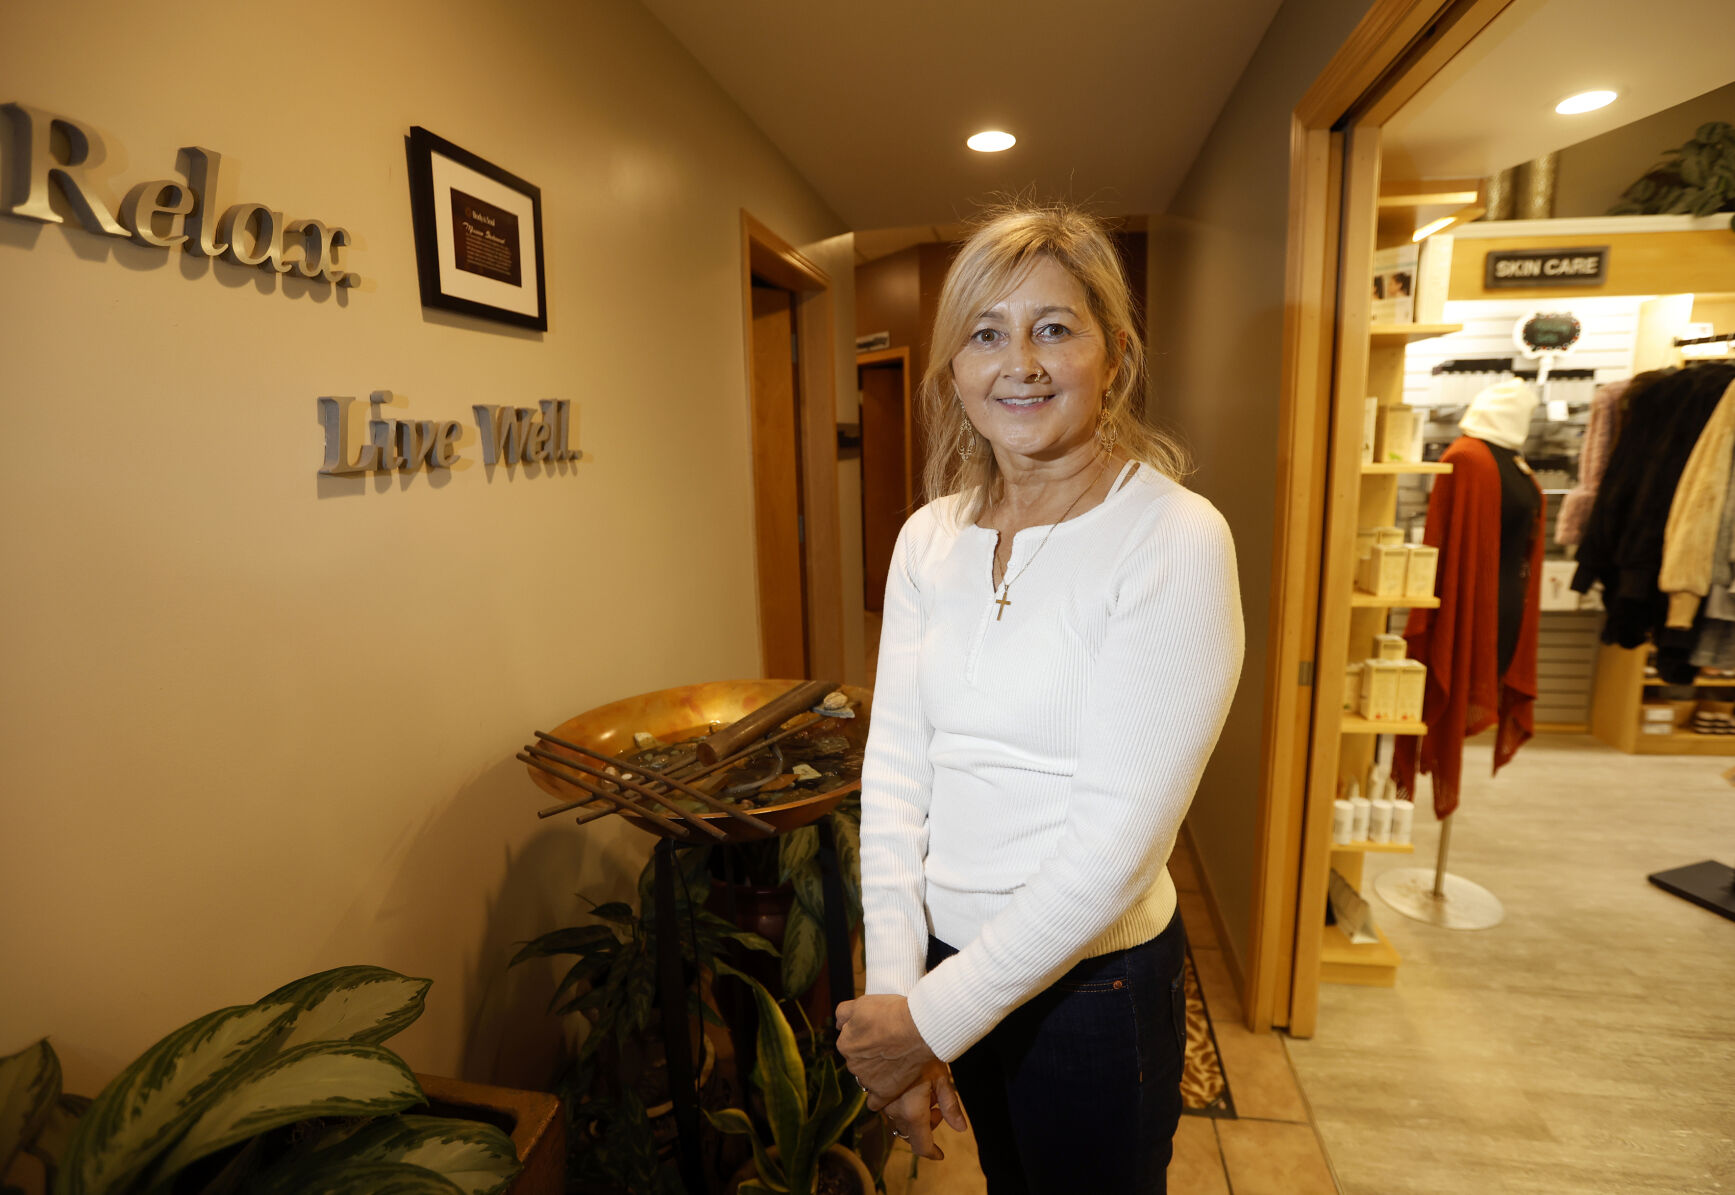 Julia Theisen owns Body & Soul Wellness Center and Spa in Dubuque.    PHOTO CREDIT: Jessica Reilly